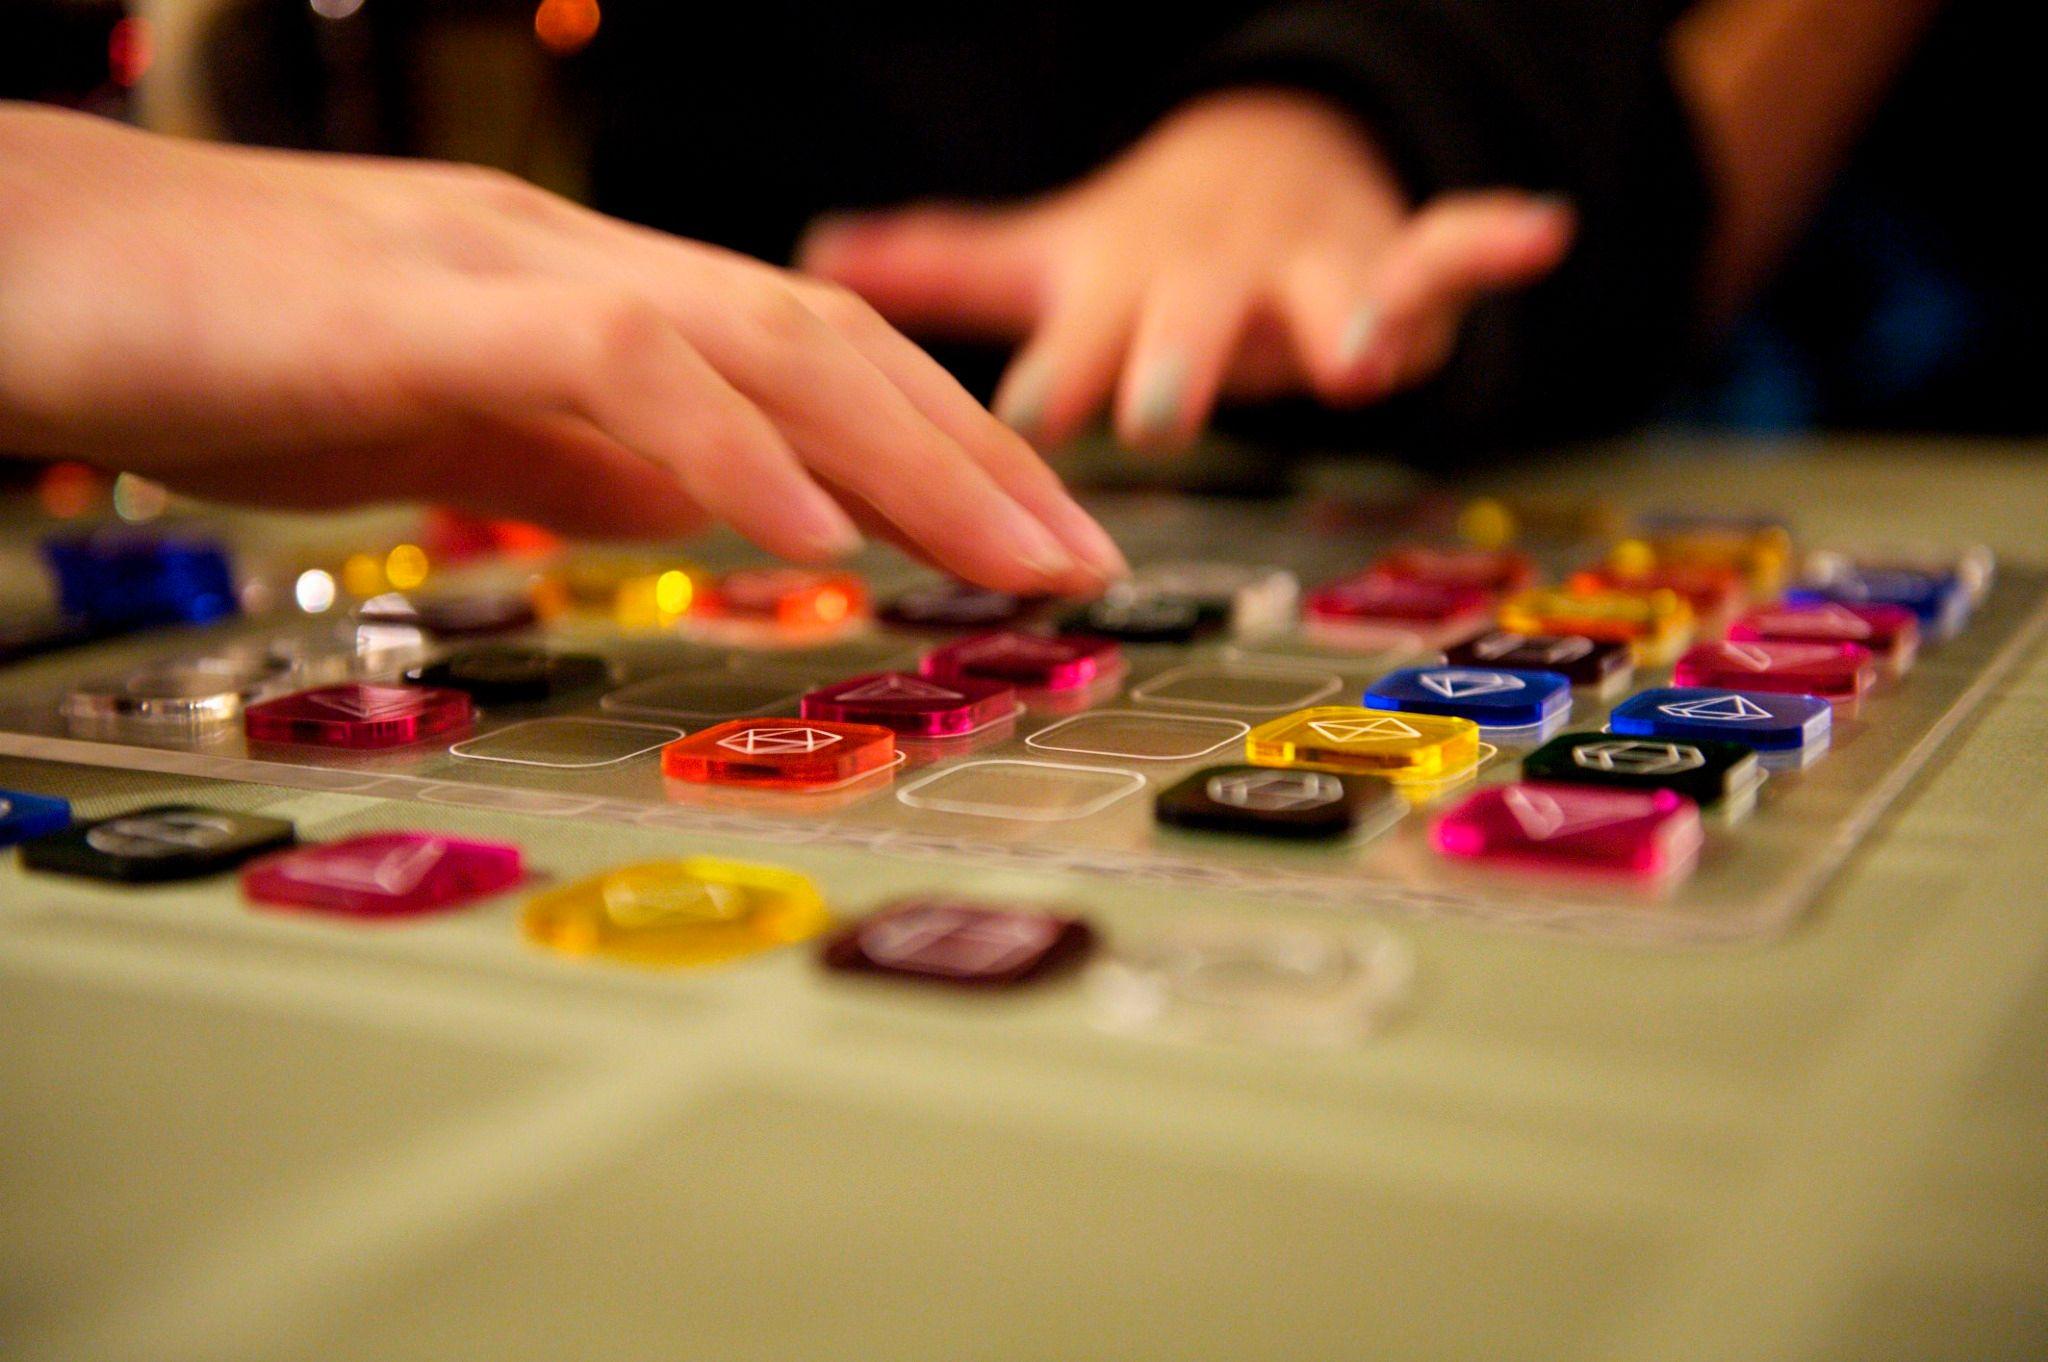 Two light skinned hands are reaching for colorful square tokens on a clear board.